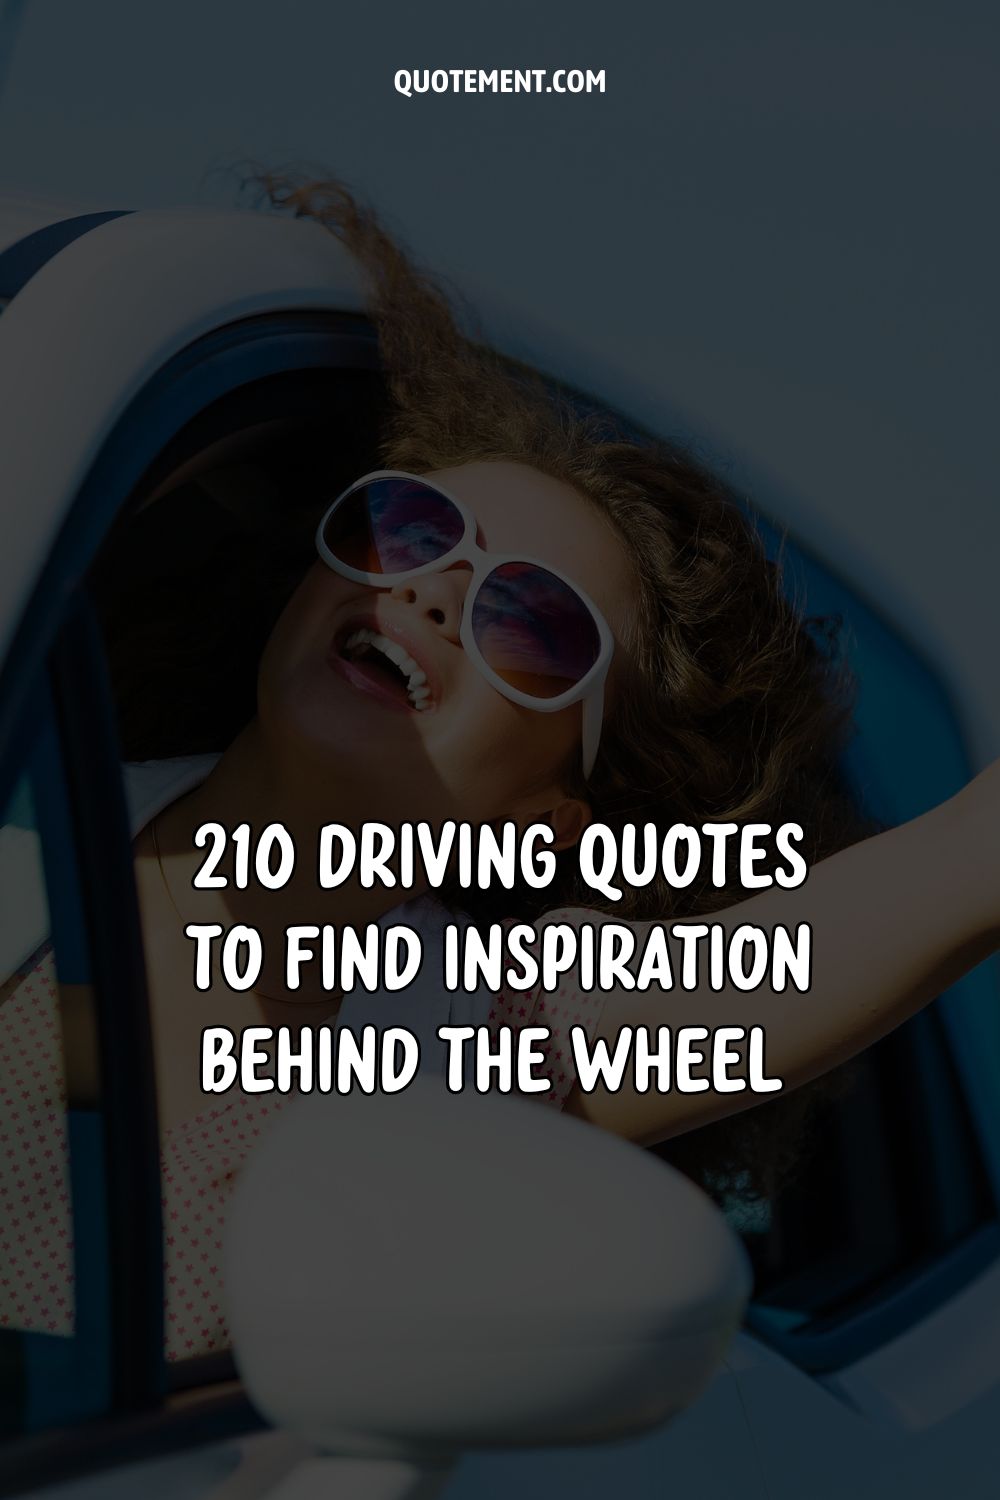 210 Driving Quotes To Find Inspiration Behind The Wheel